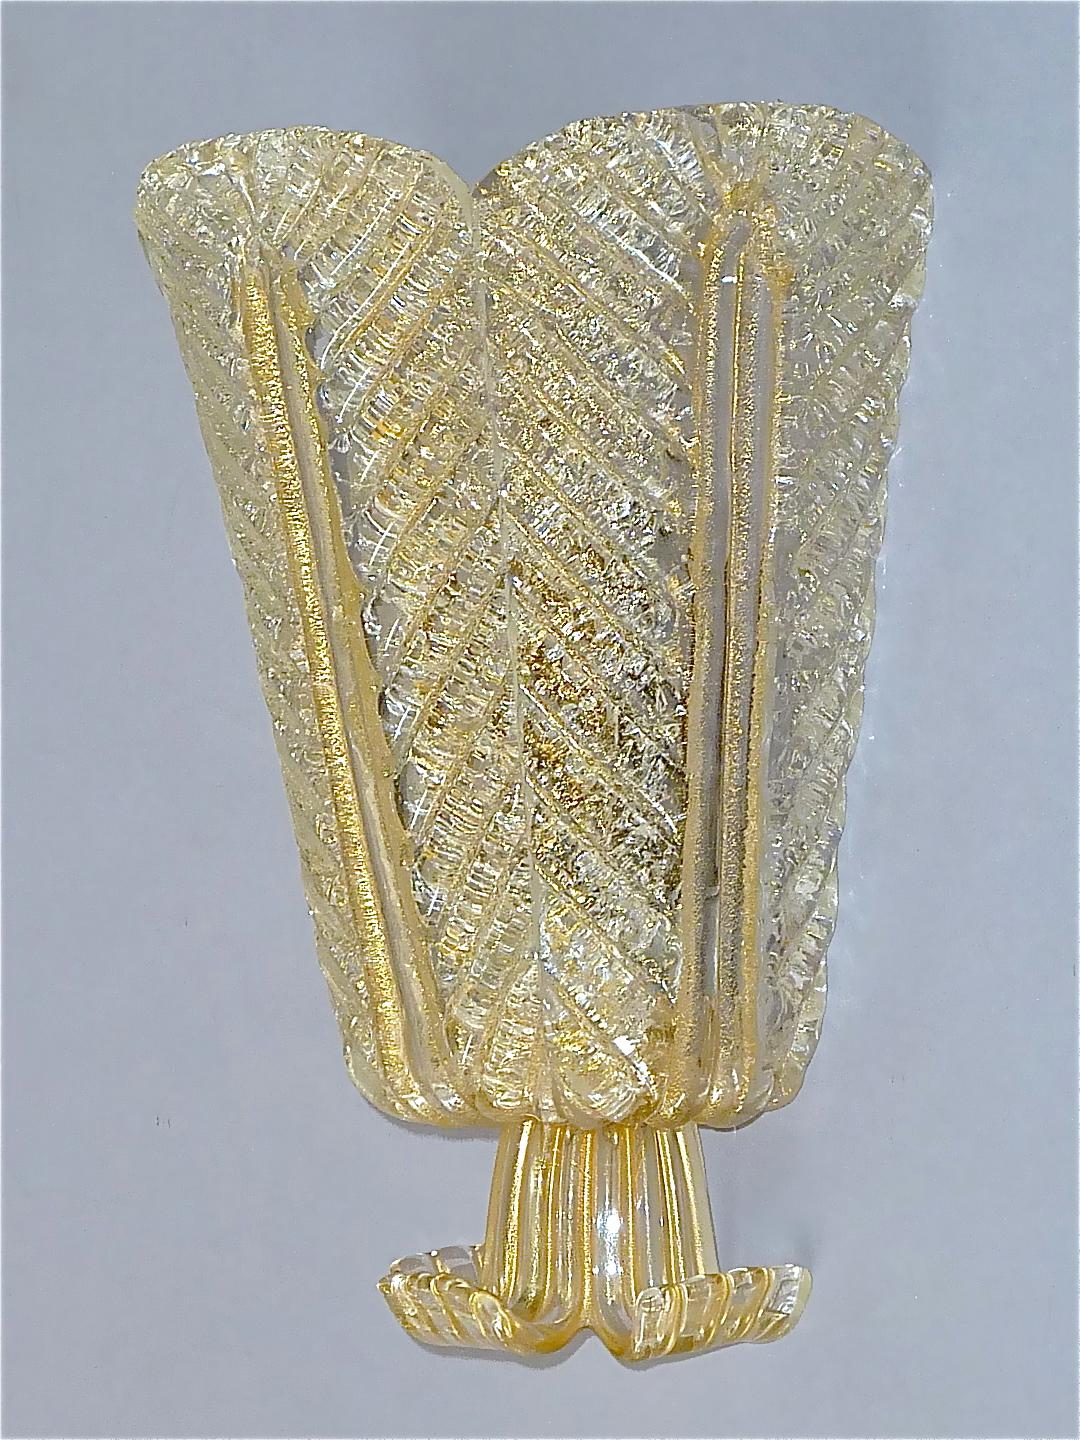 Rare Ercole Barovier Toso Flower Leaf Sconce Lamp Gold Murano Glass Art Deco For Sale 10